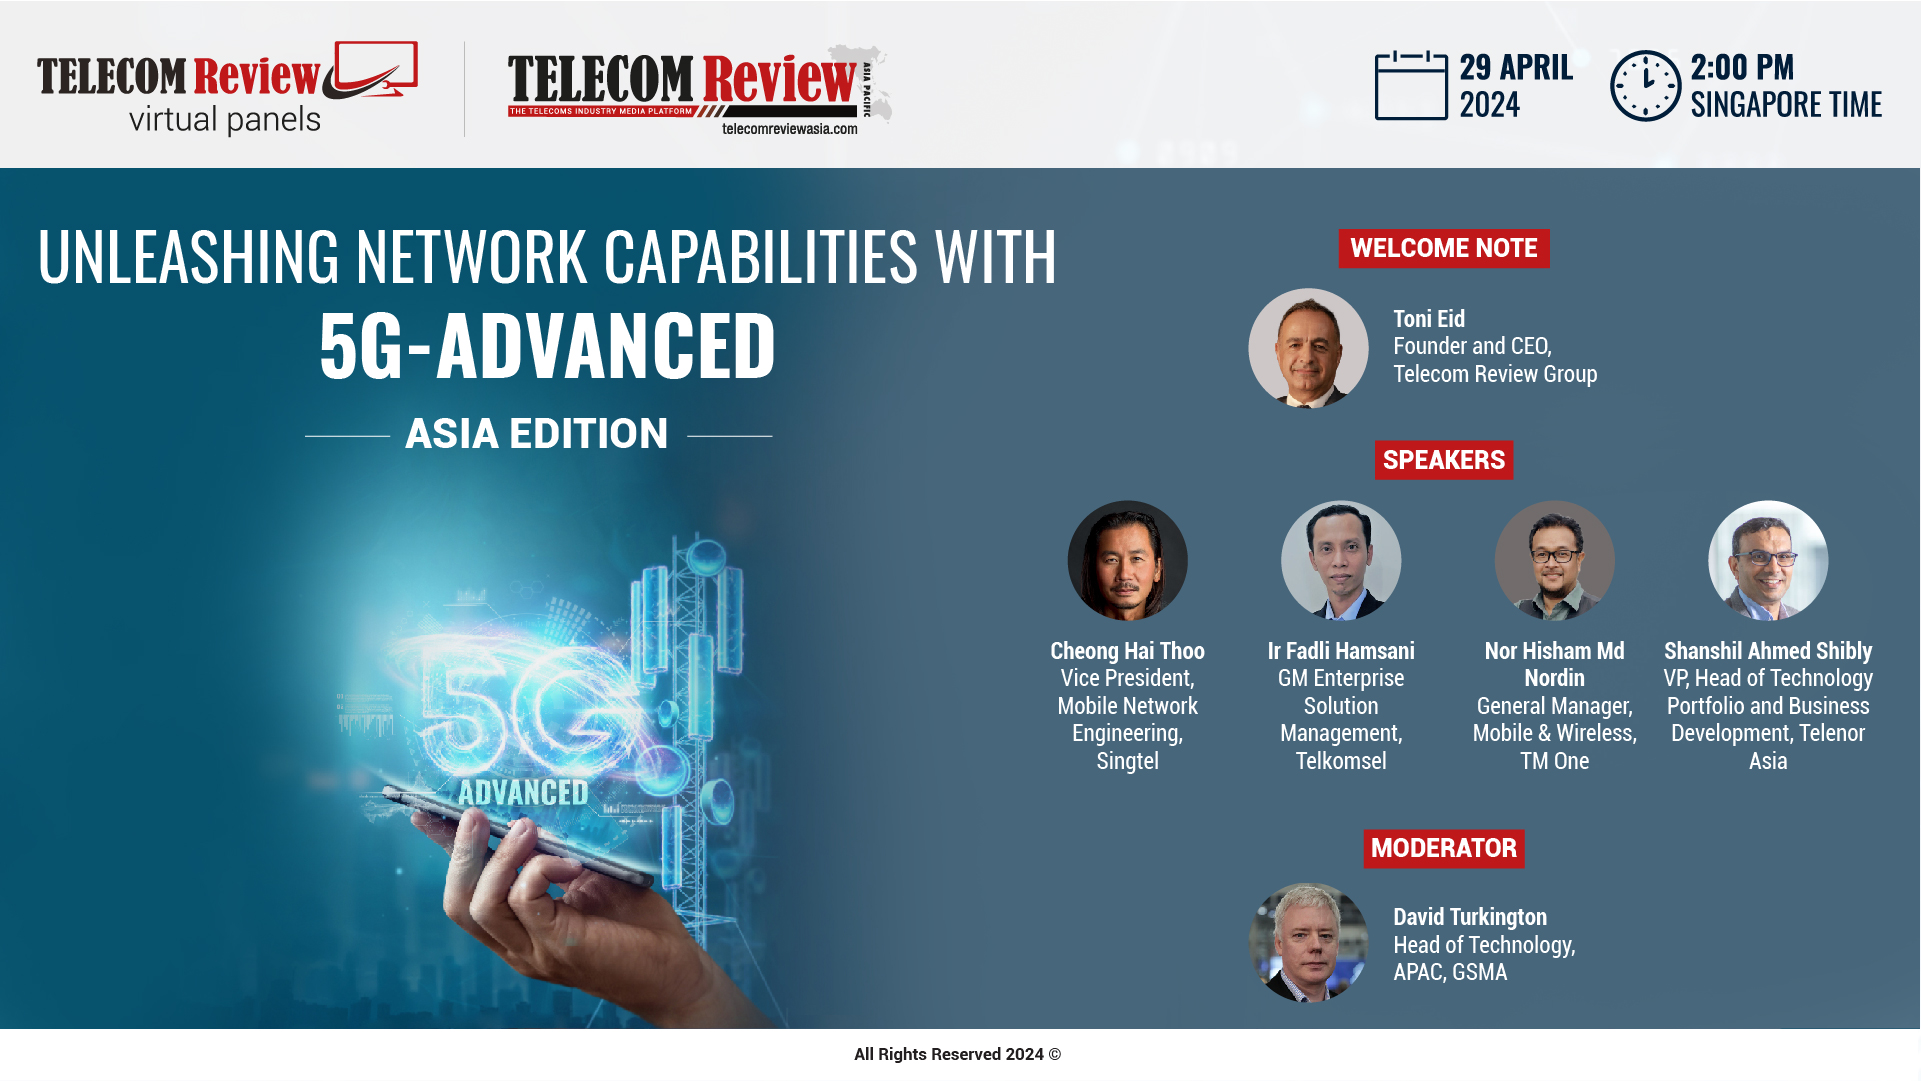 Unleashing Network Capabilities with 5G-Advanced in Asia